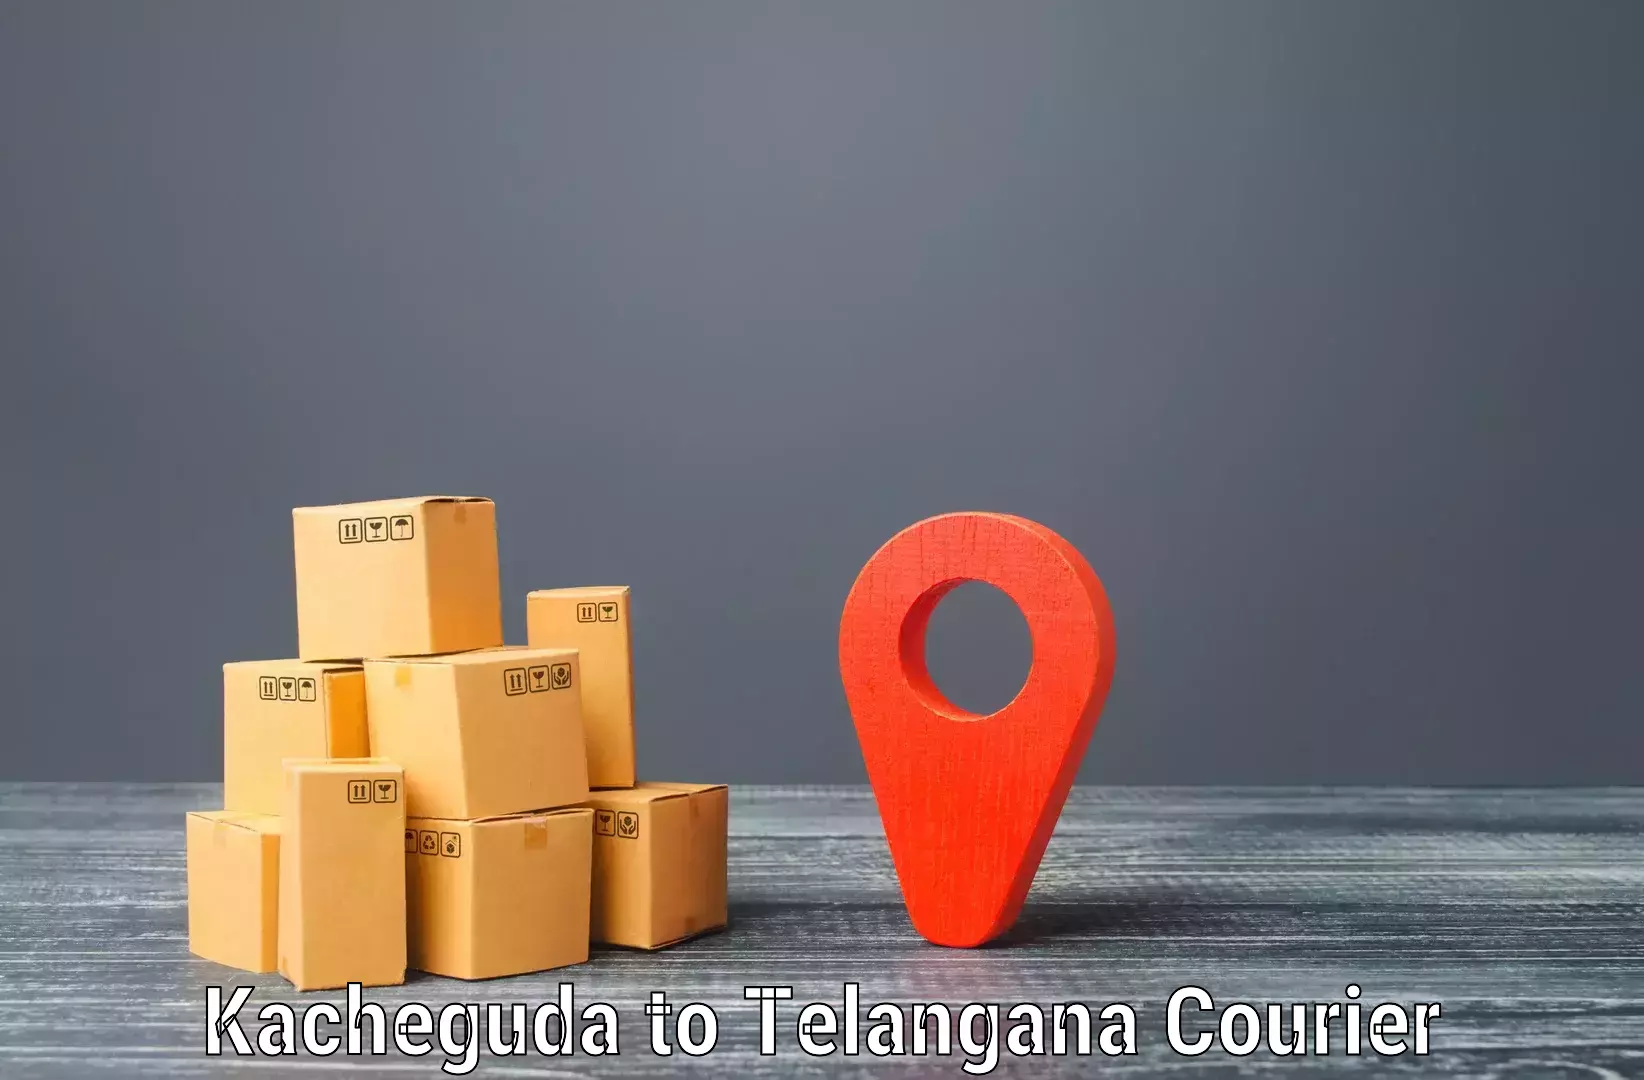 Rural area delivery in Kacheguda to Medchal